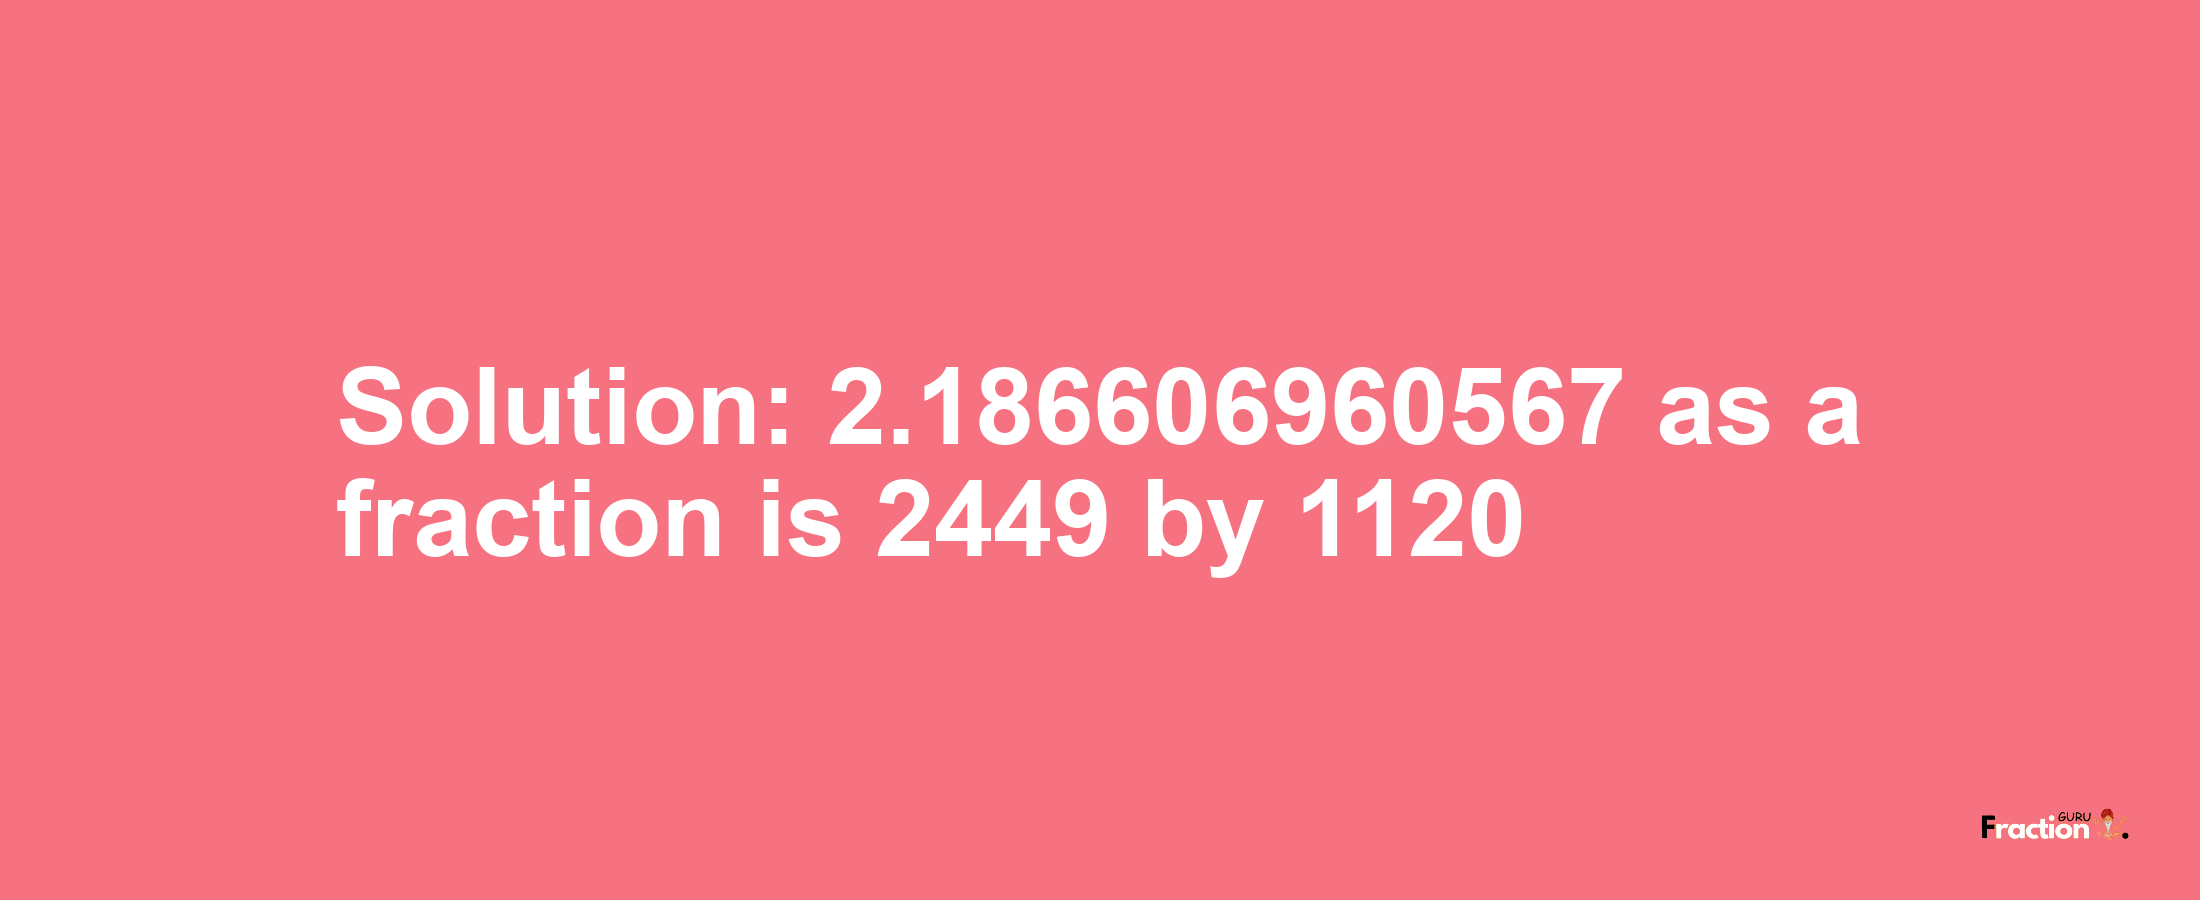 Solution:2.186606960567 as a fraction is 2449/1120